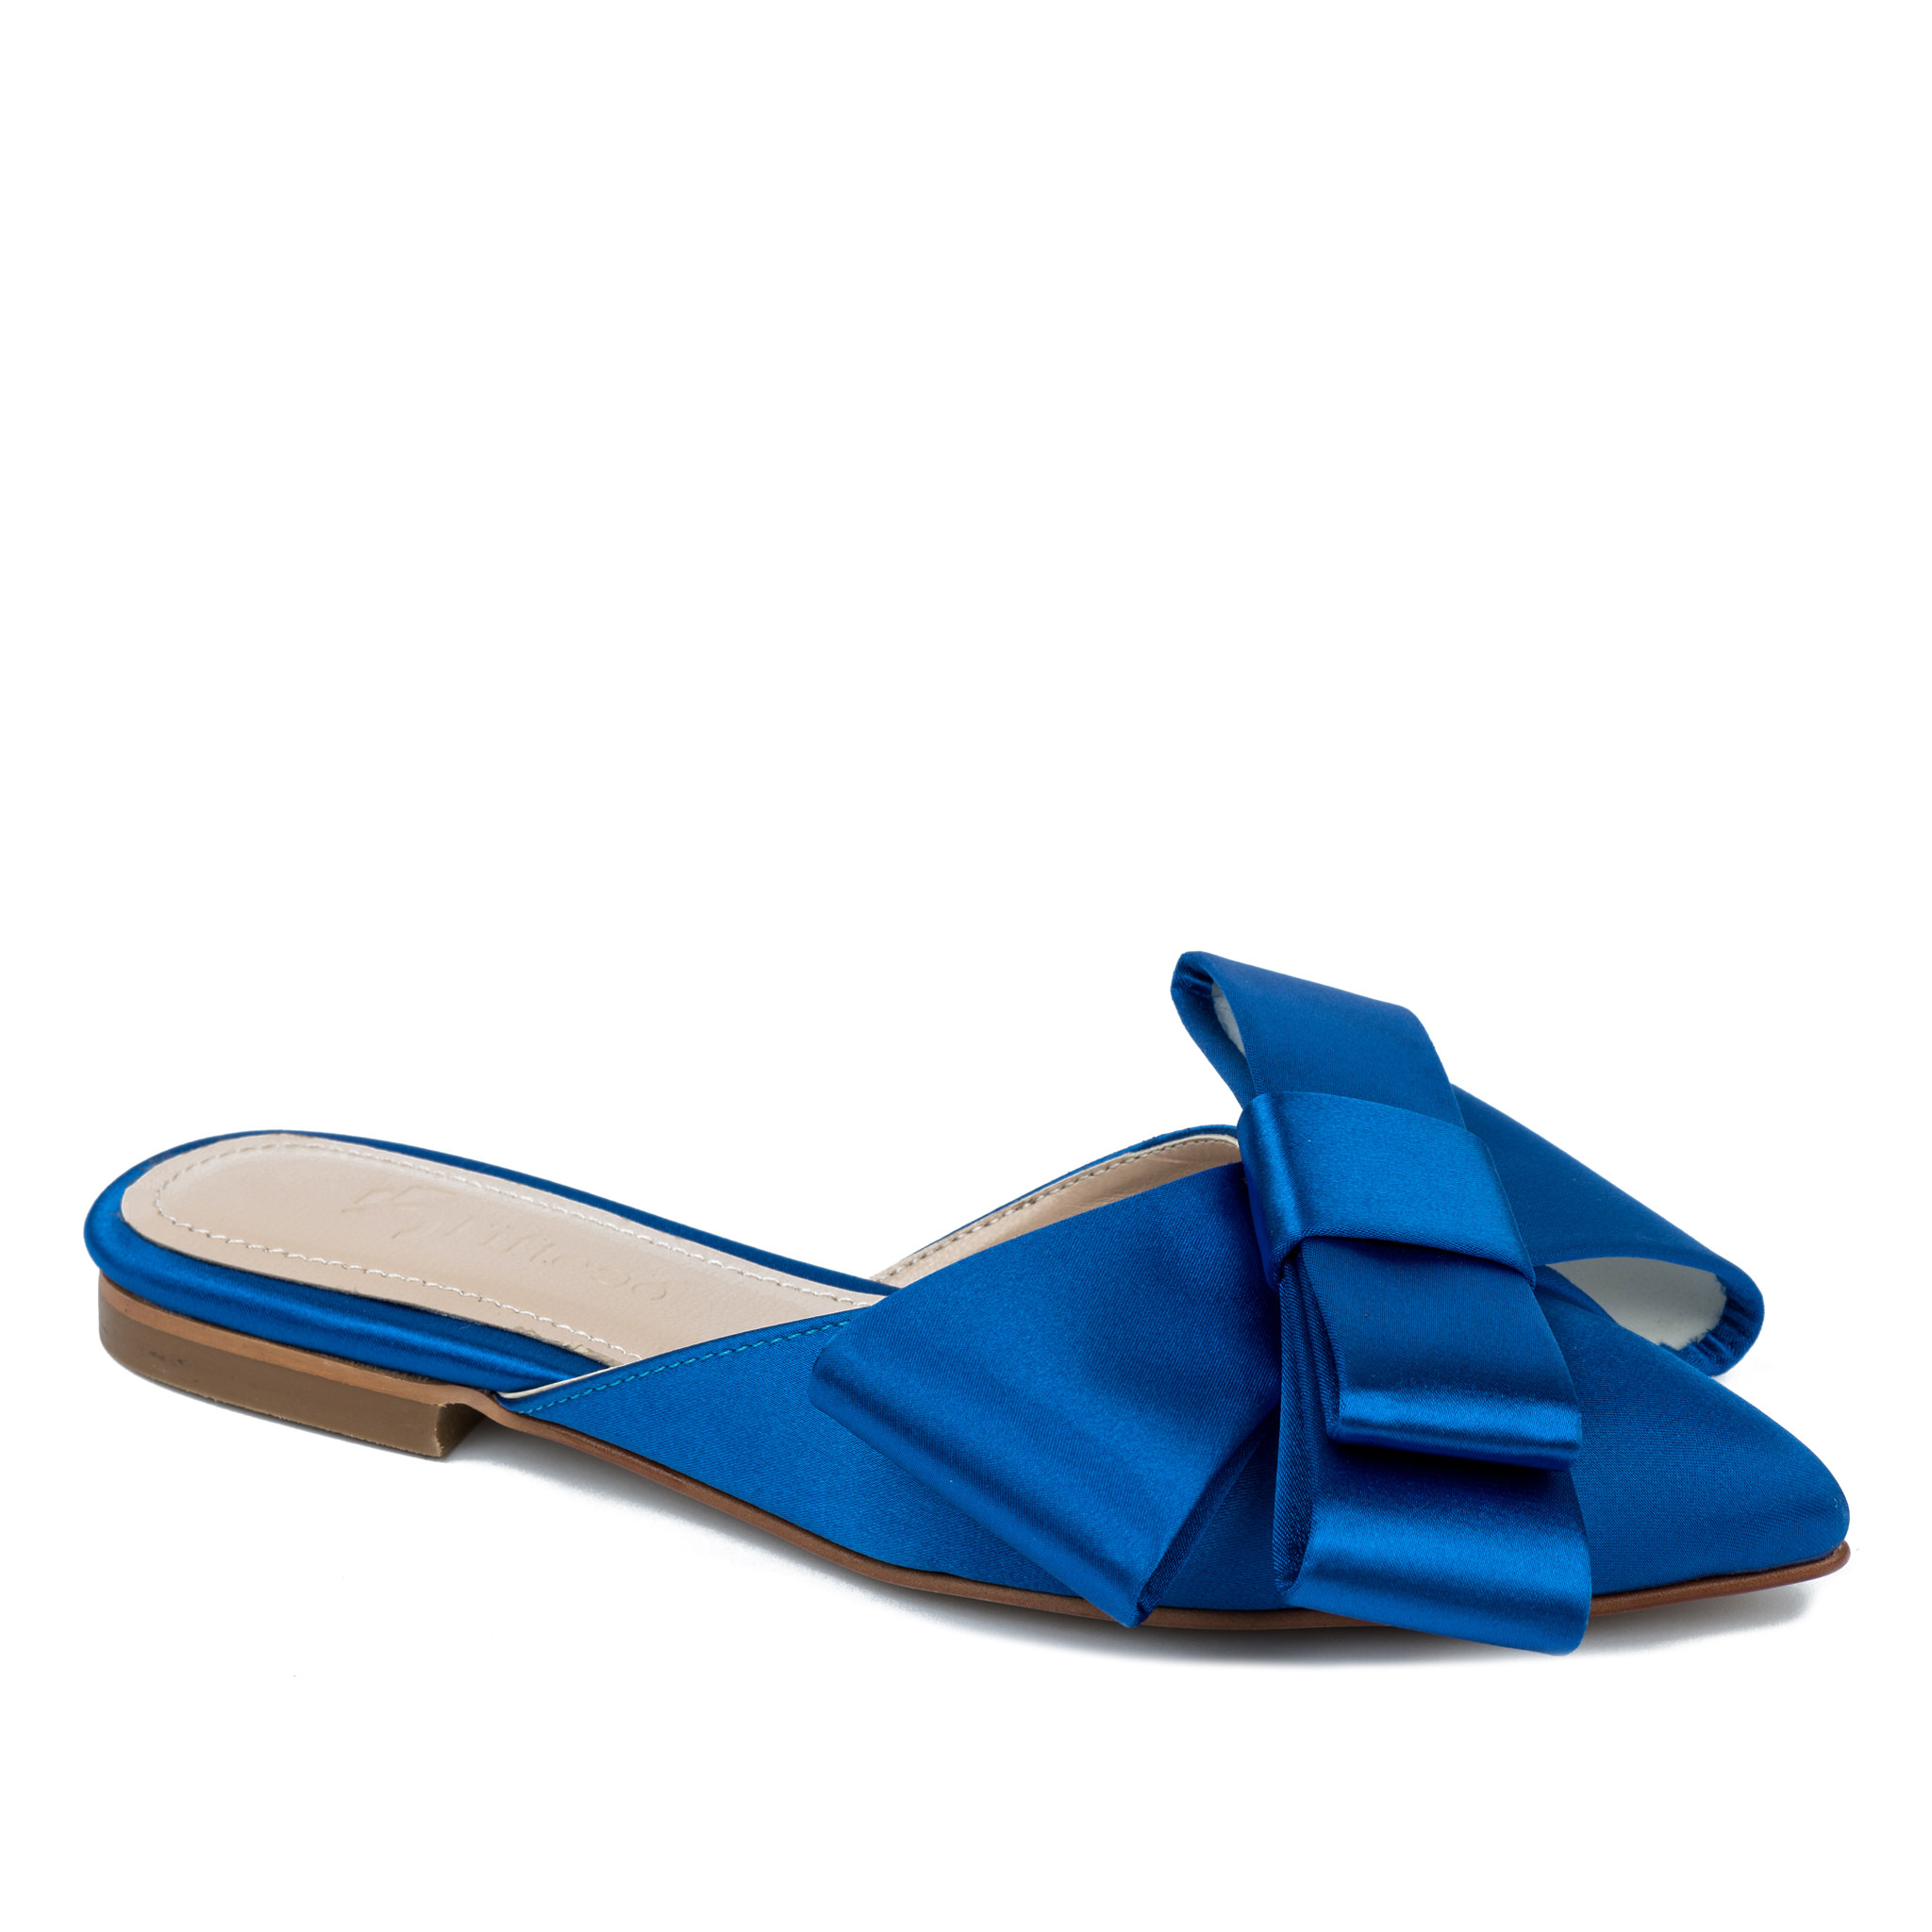 Women Slippers and Mules A285 - BLUE